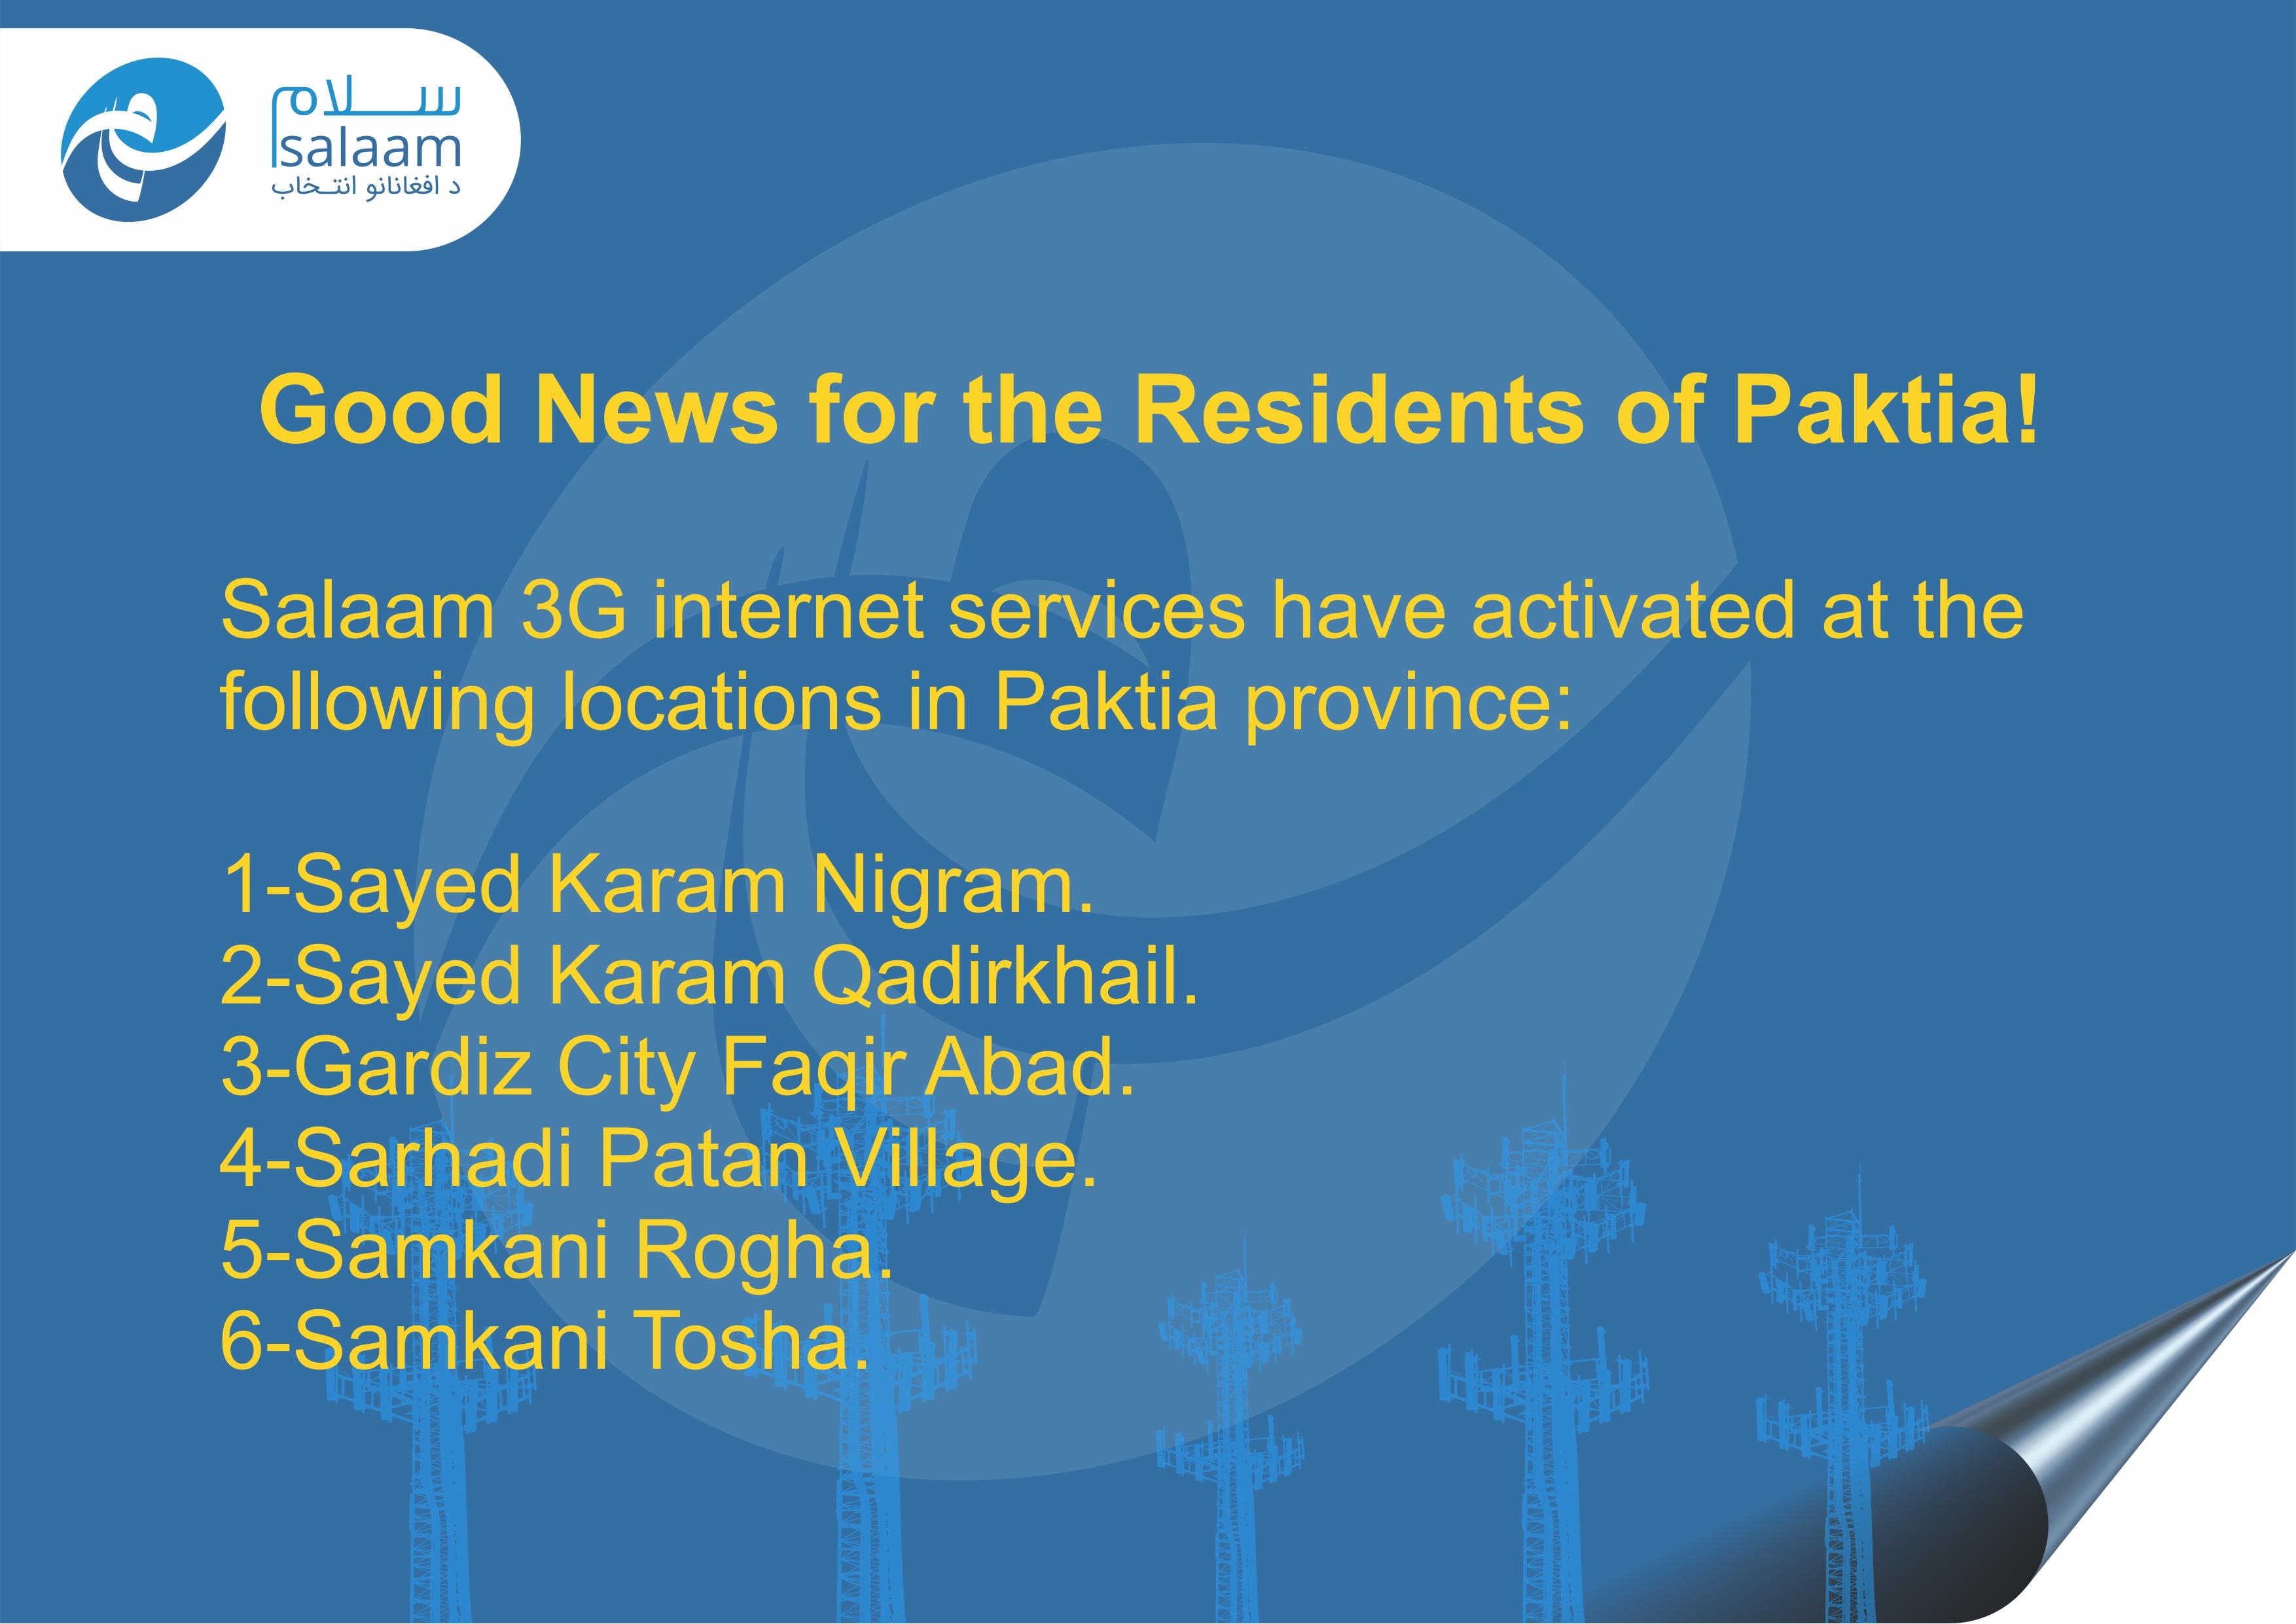 Good News for the Residents of Paktia!